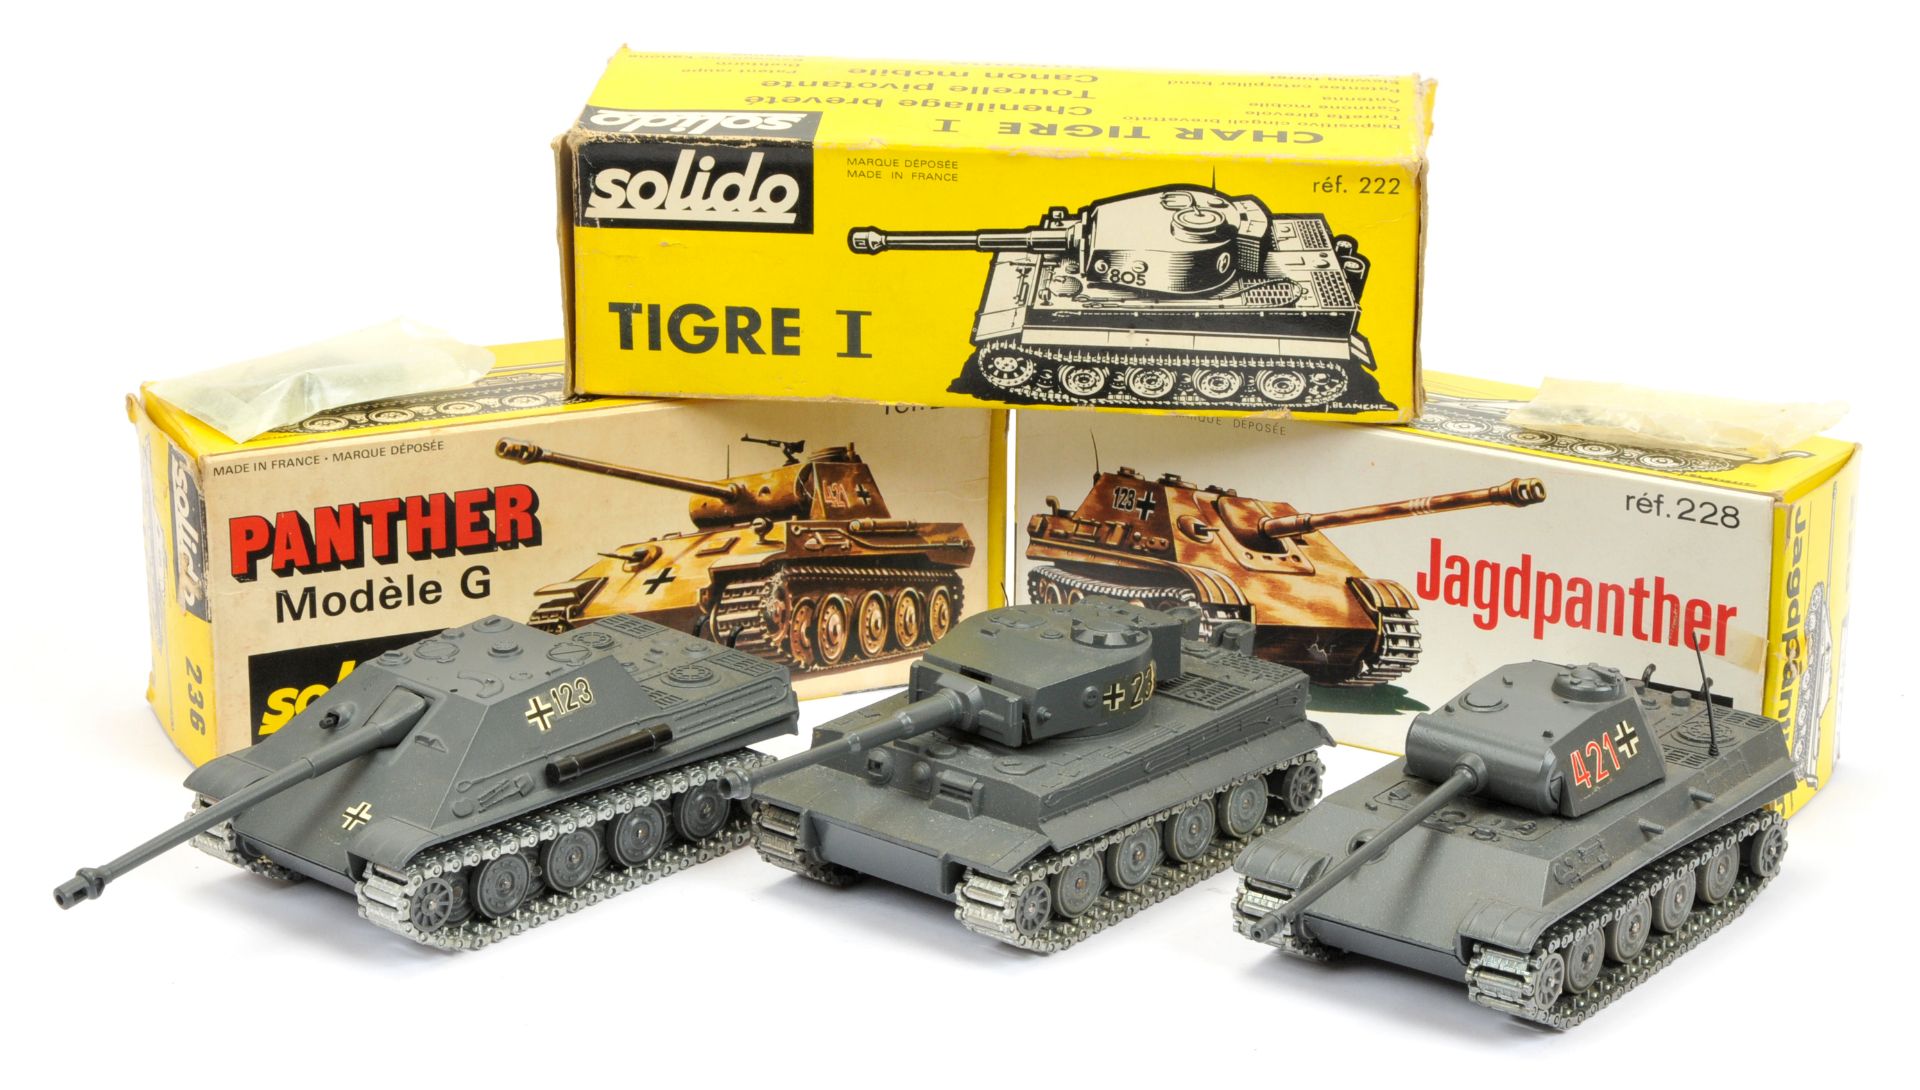 Solido military group of 3 Tanks - (1) 222 Tiger, (2) 228 Jagdpanther with accessories